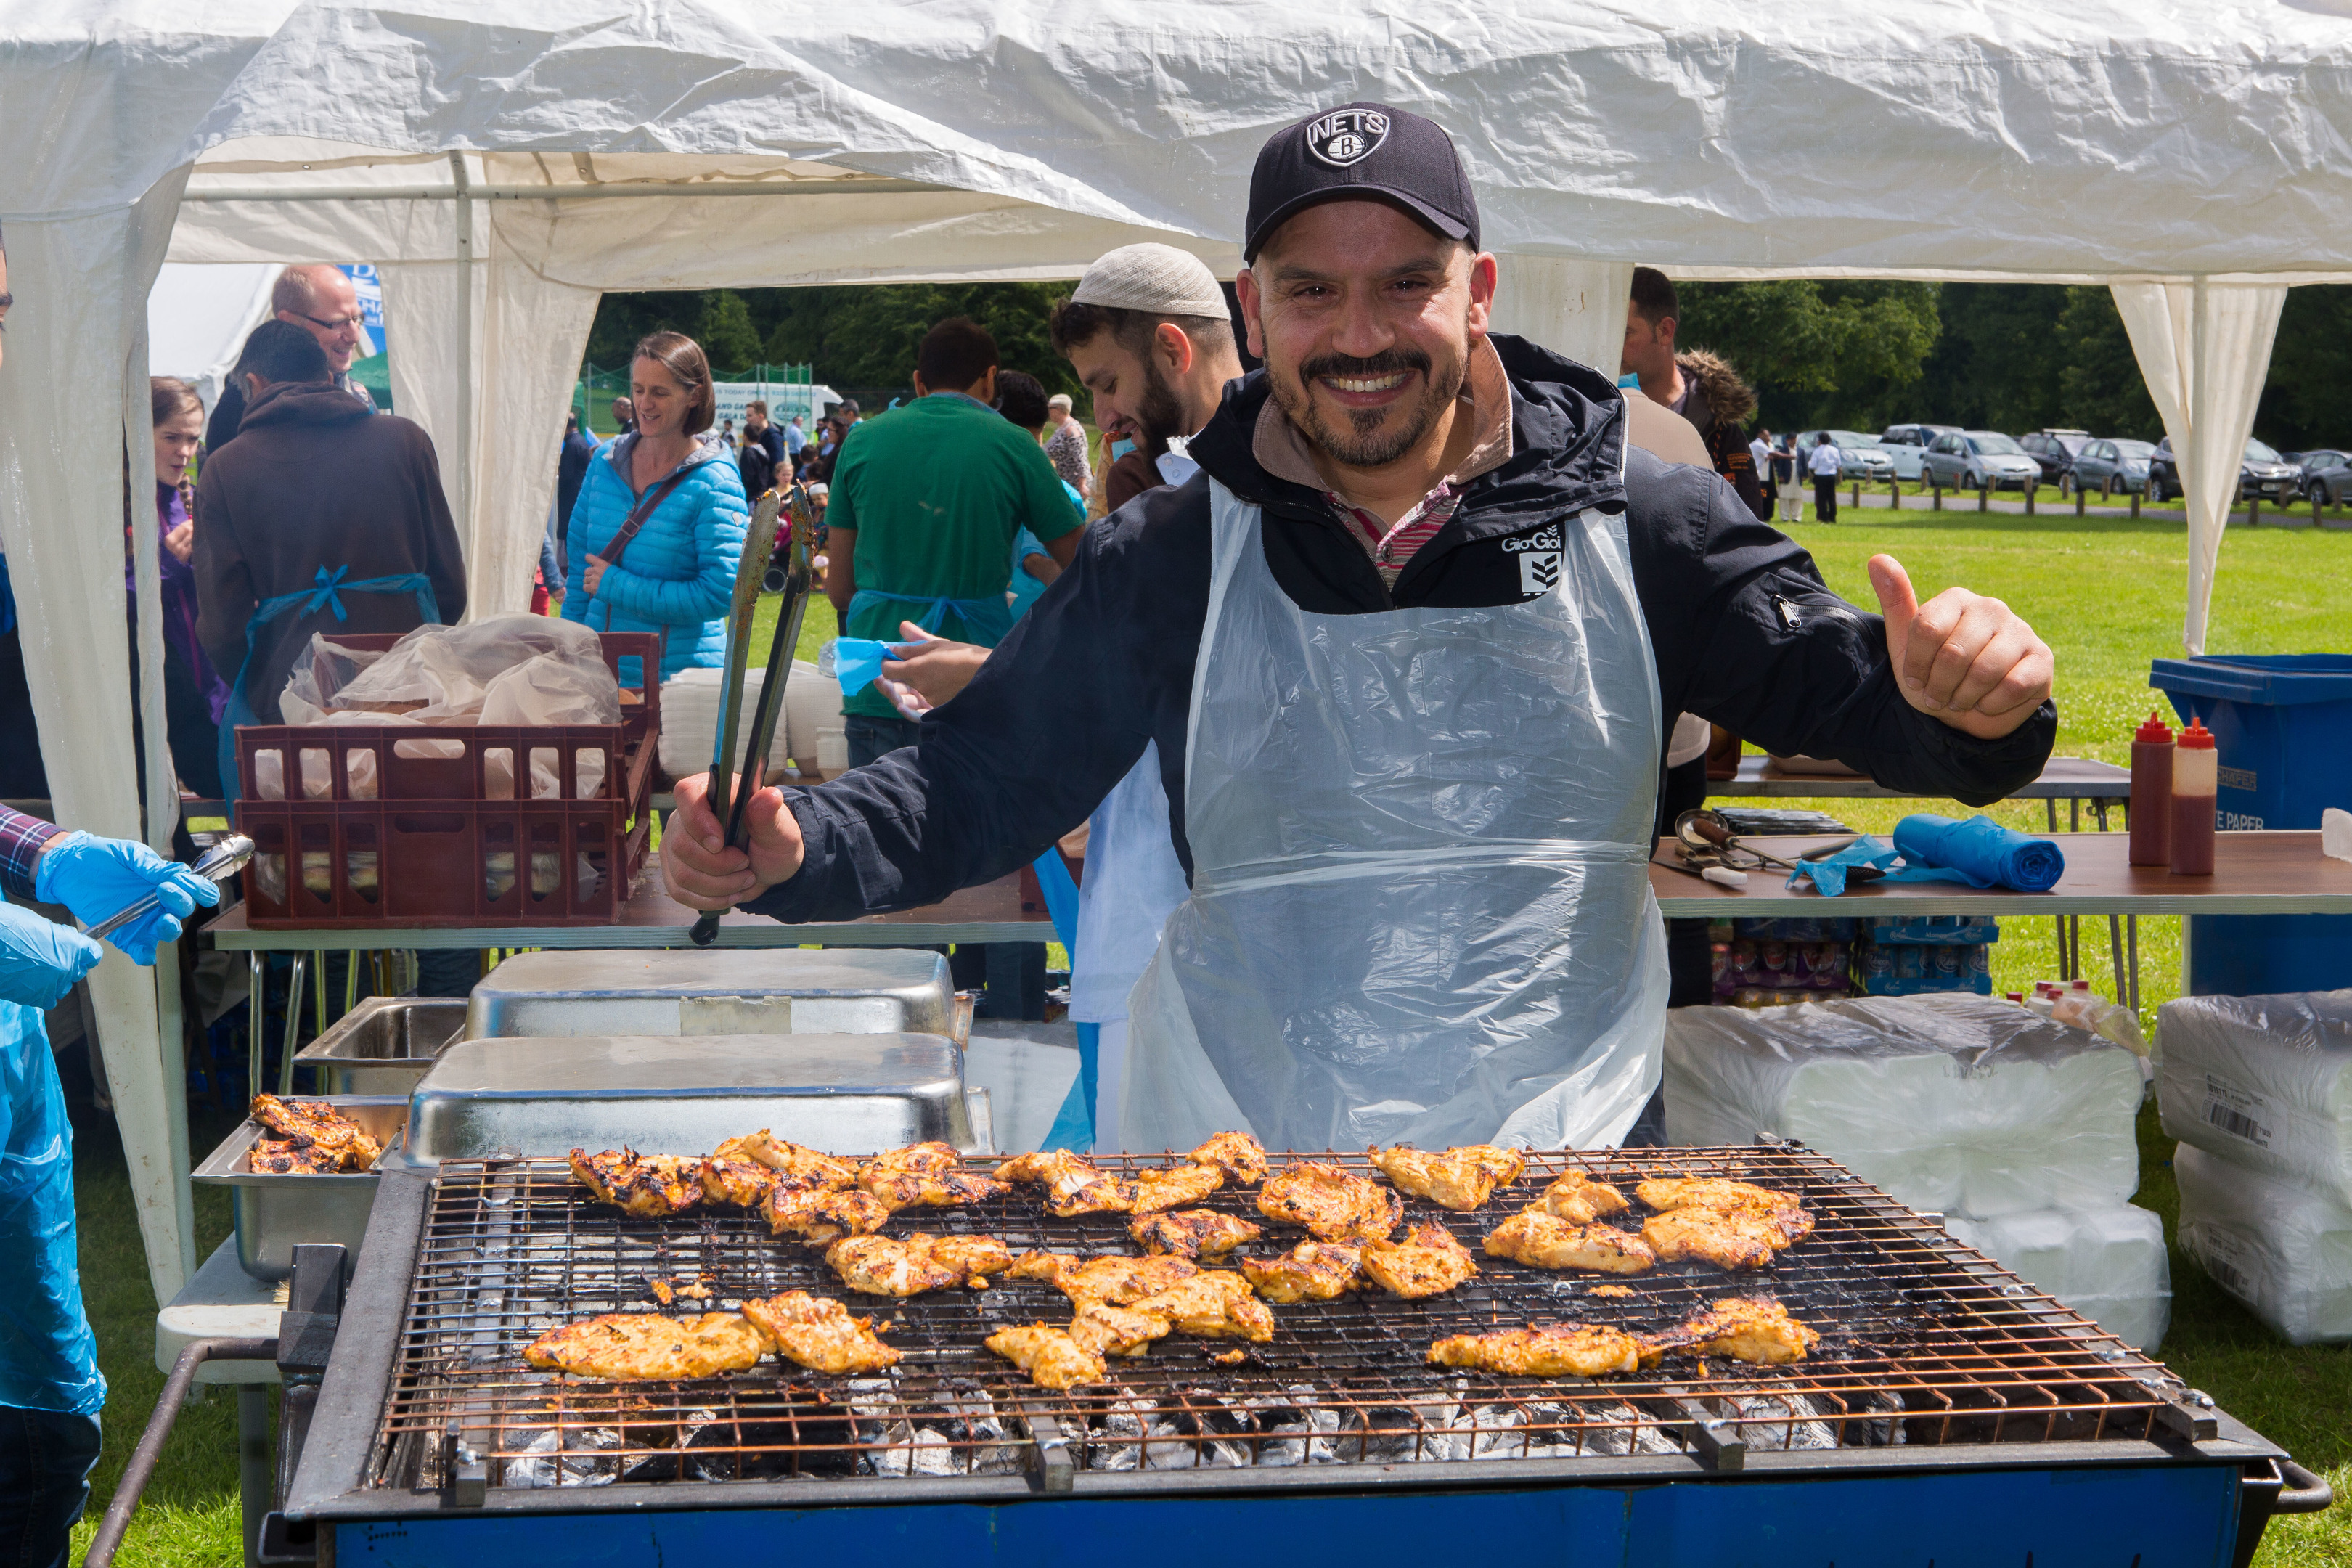 Last year's Eid in the Park saw the event continue to grow in popularity.